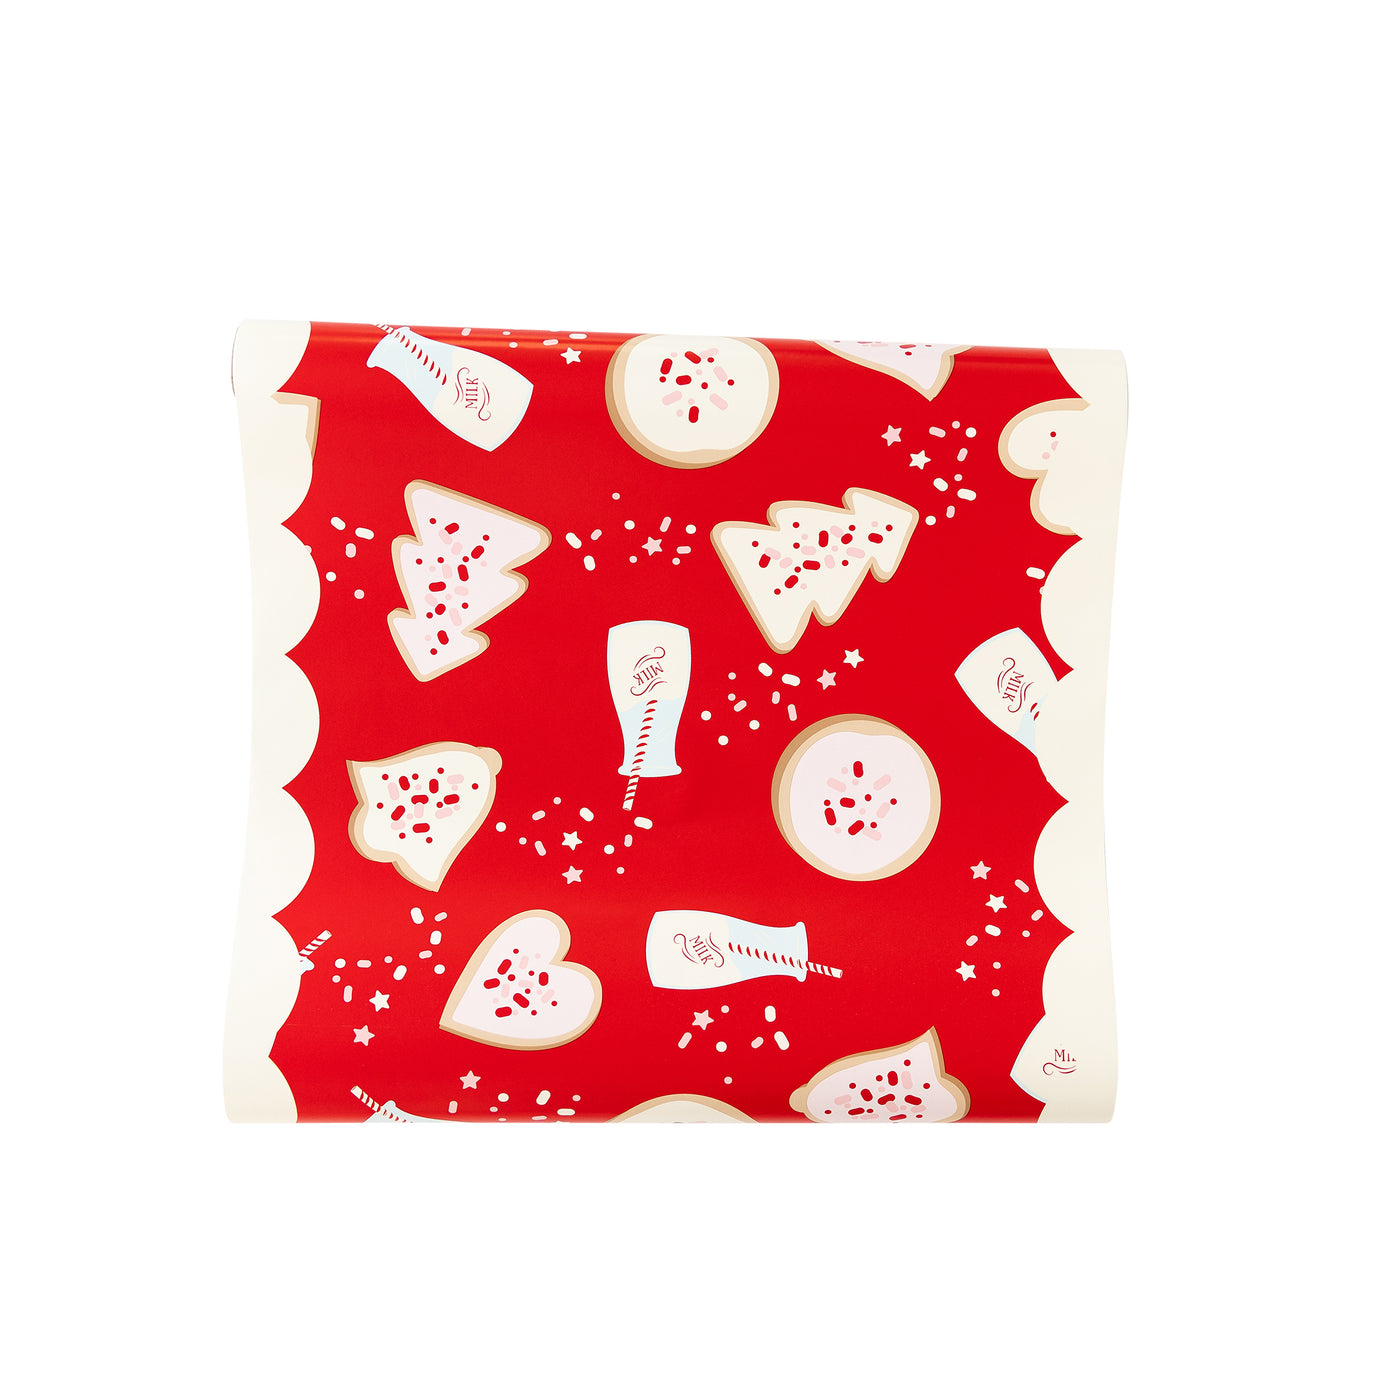 PLTBR112 - Red Milk and Cookies Paper Table Runner